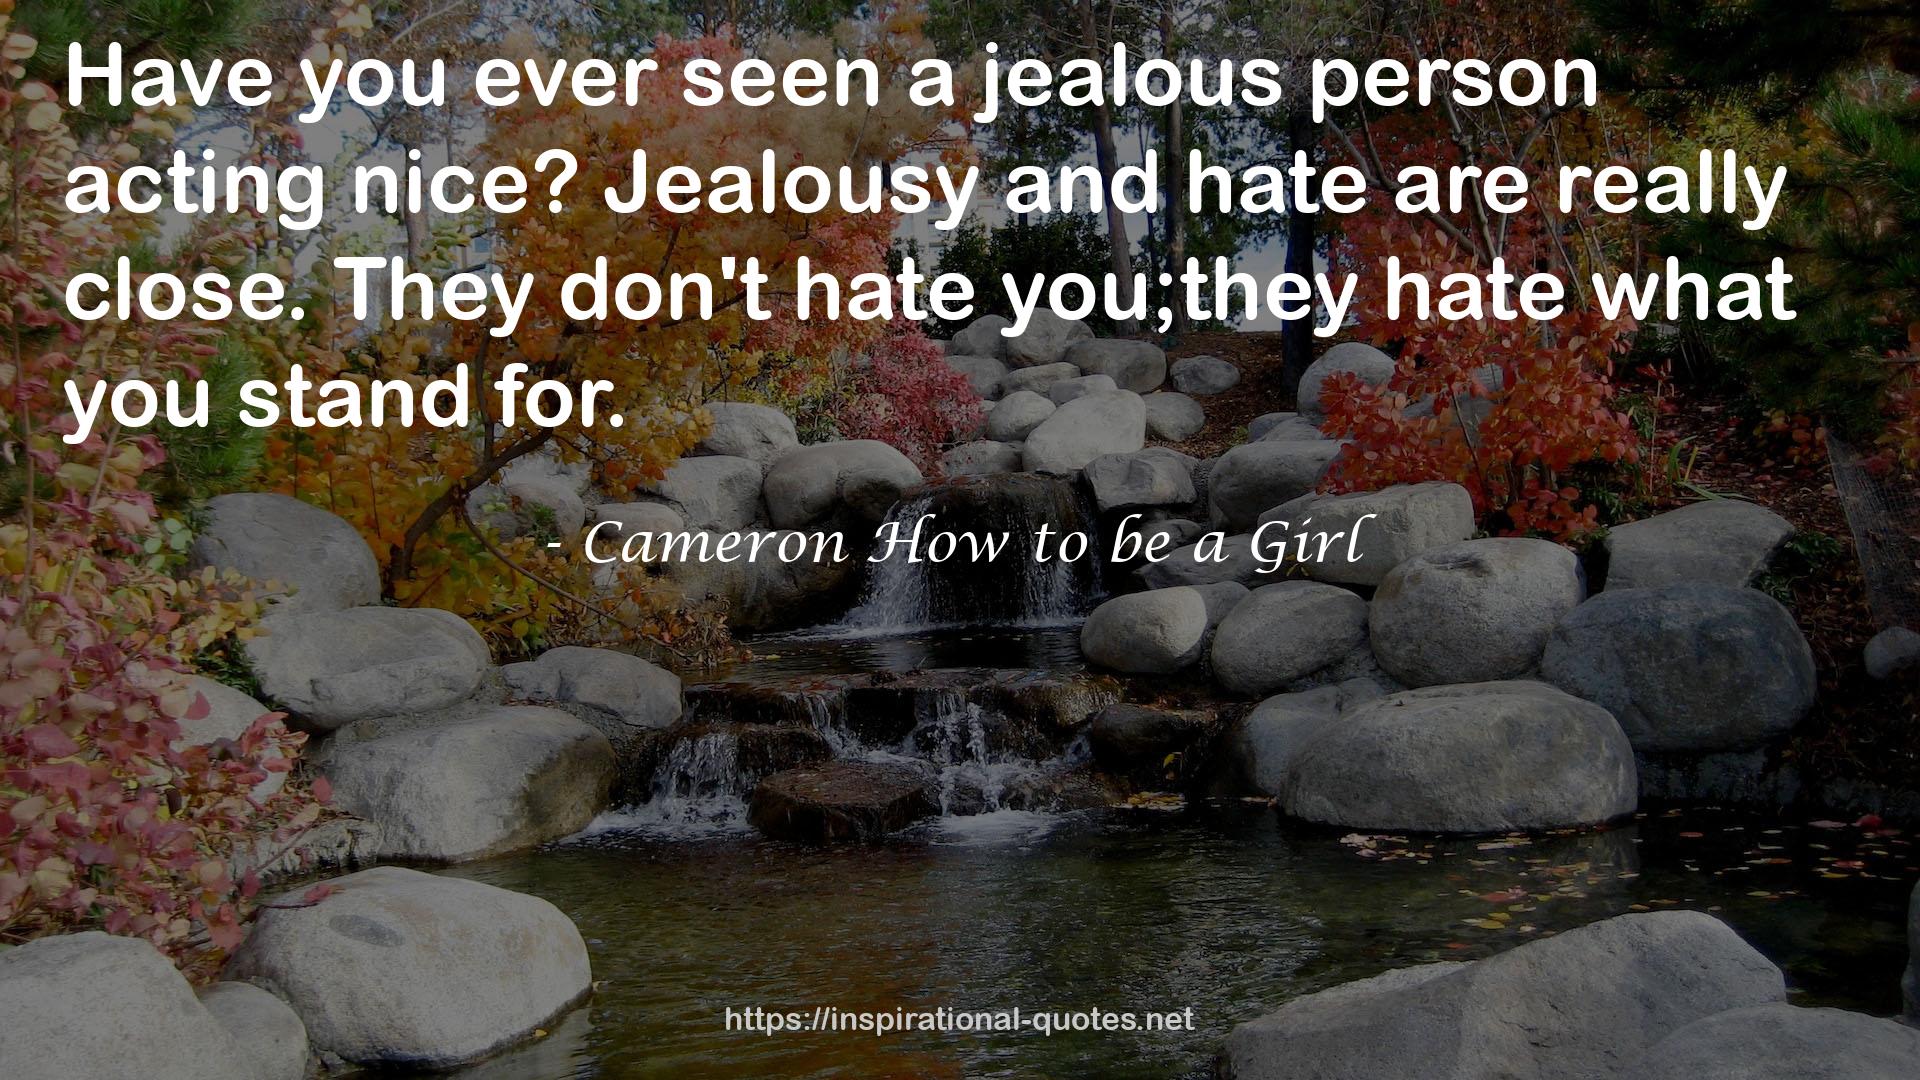 Cameron How to be a Girl QUOTES